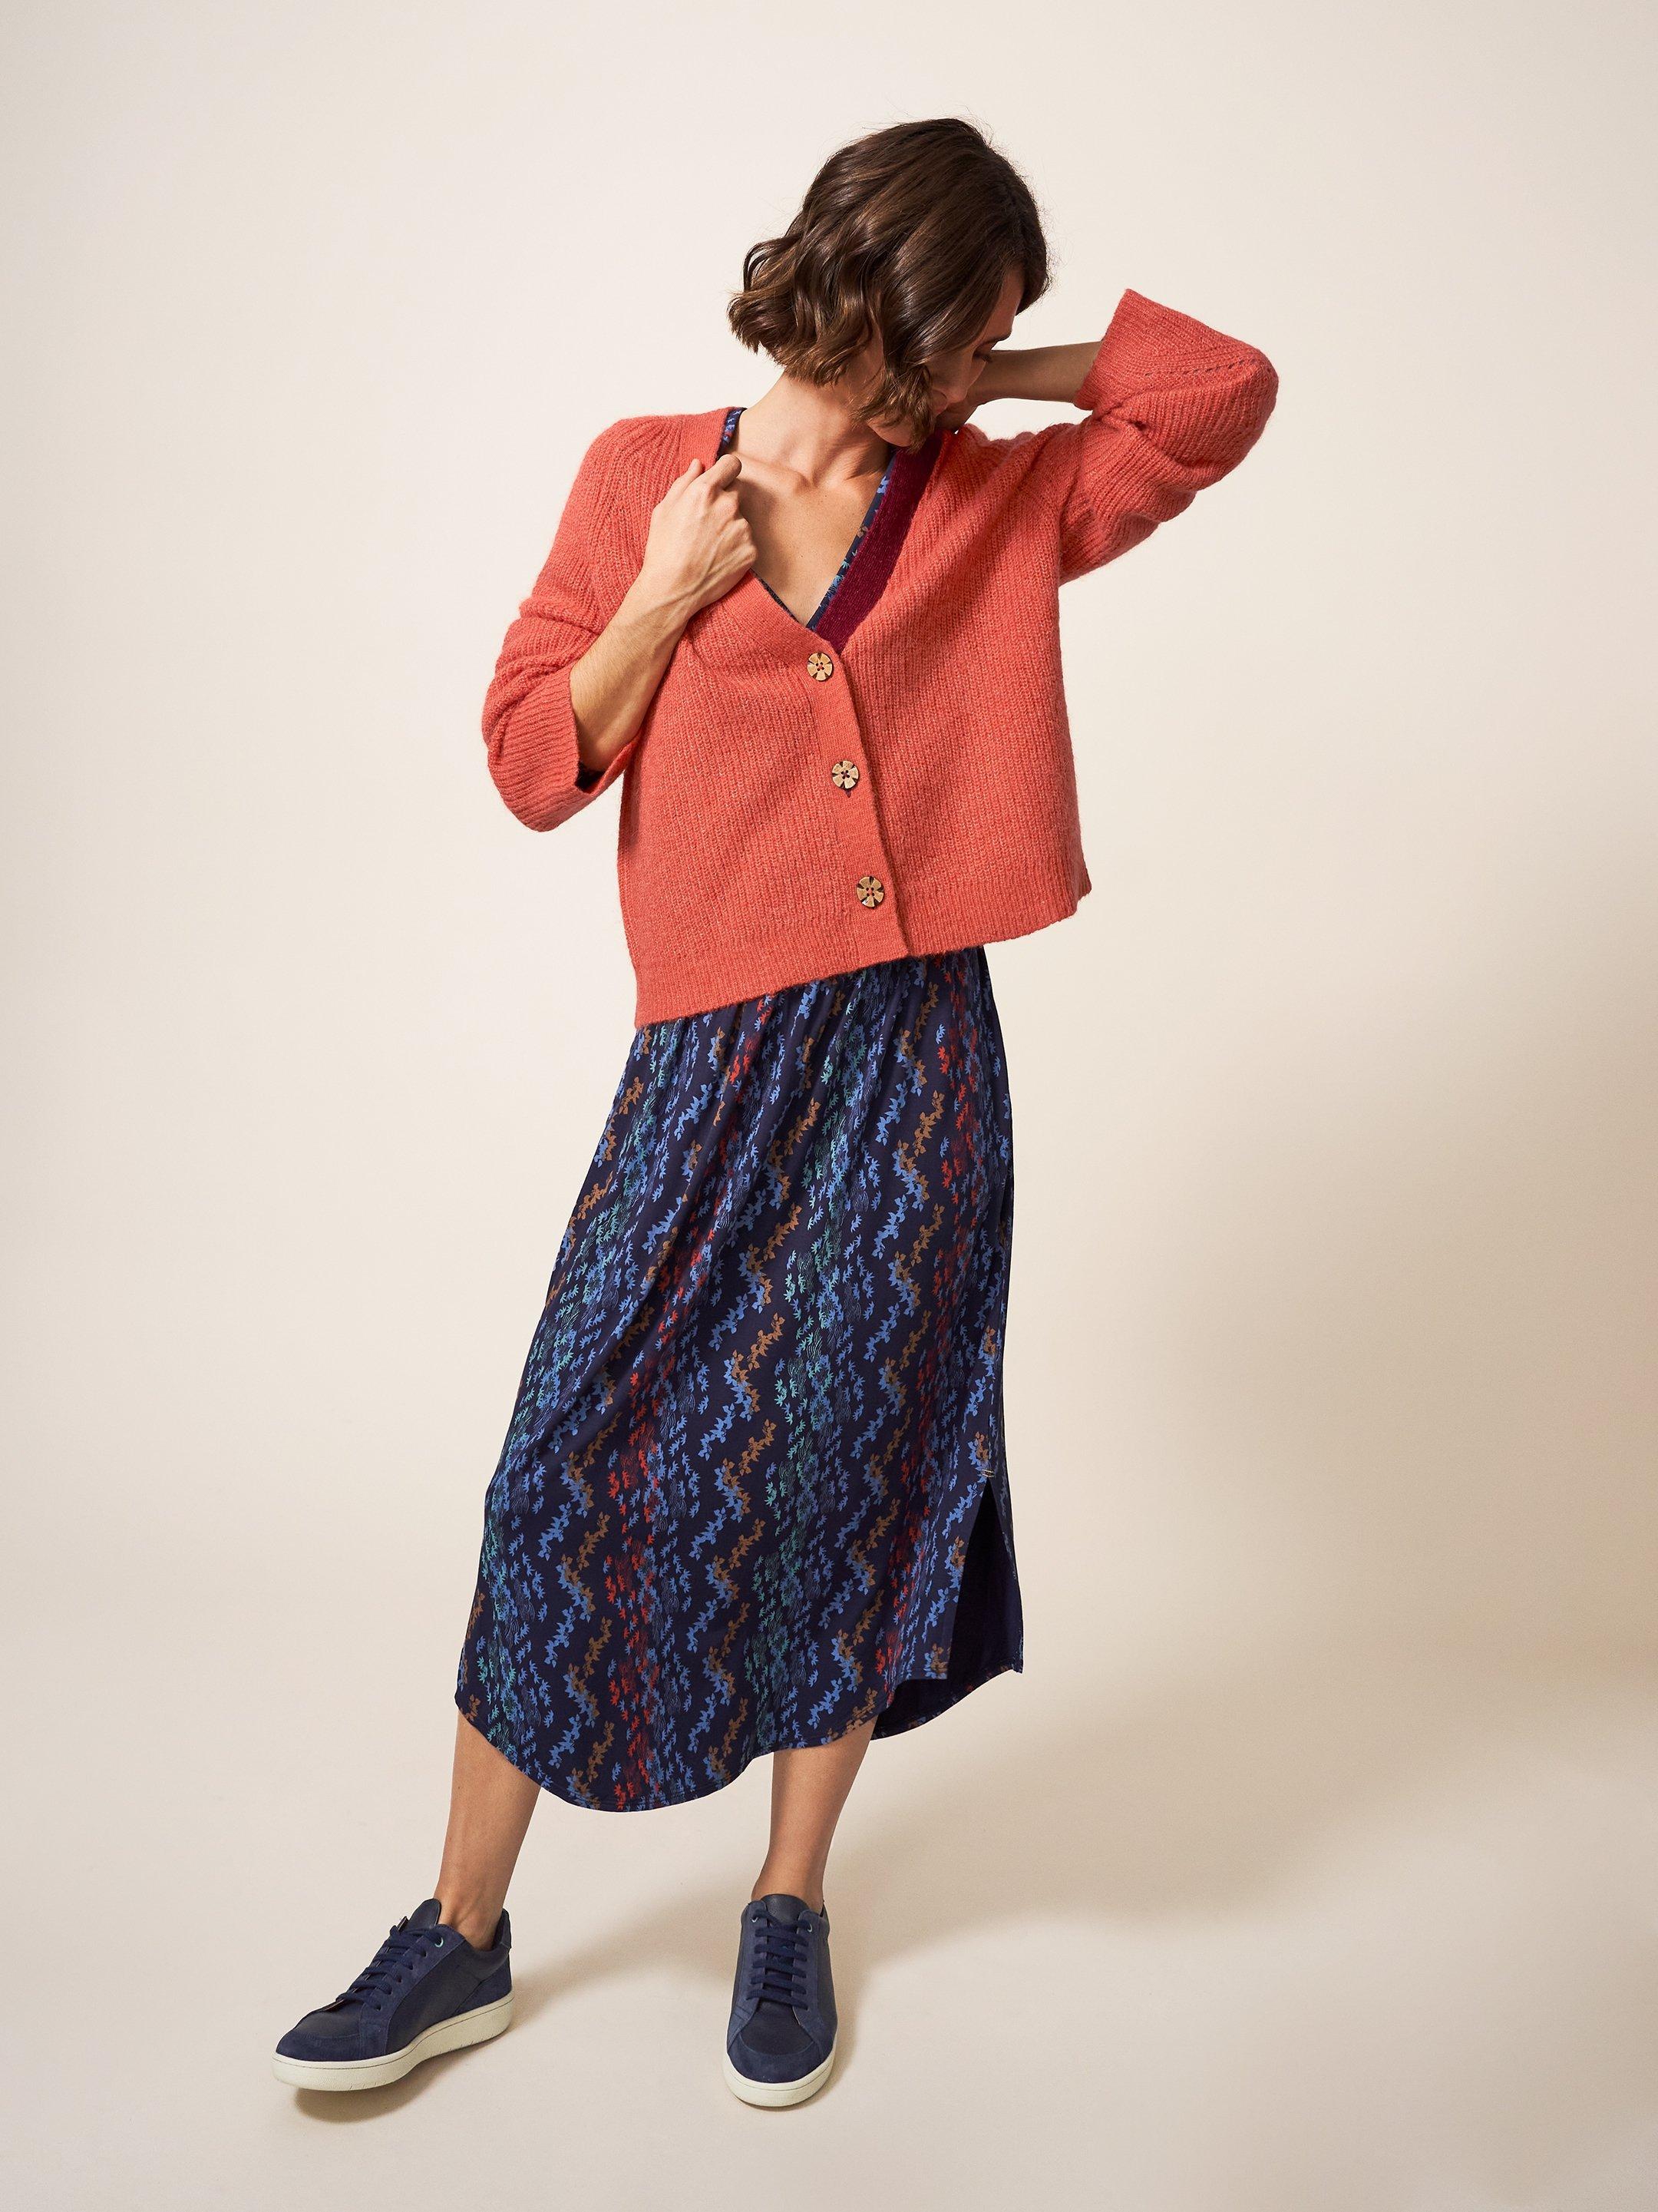 Dehlia Knitted Cardigan in MID ORANGE - MODEL FRONT